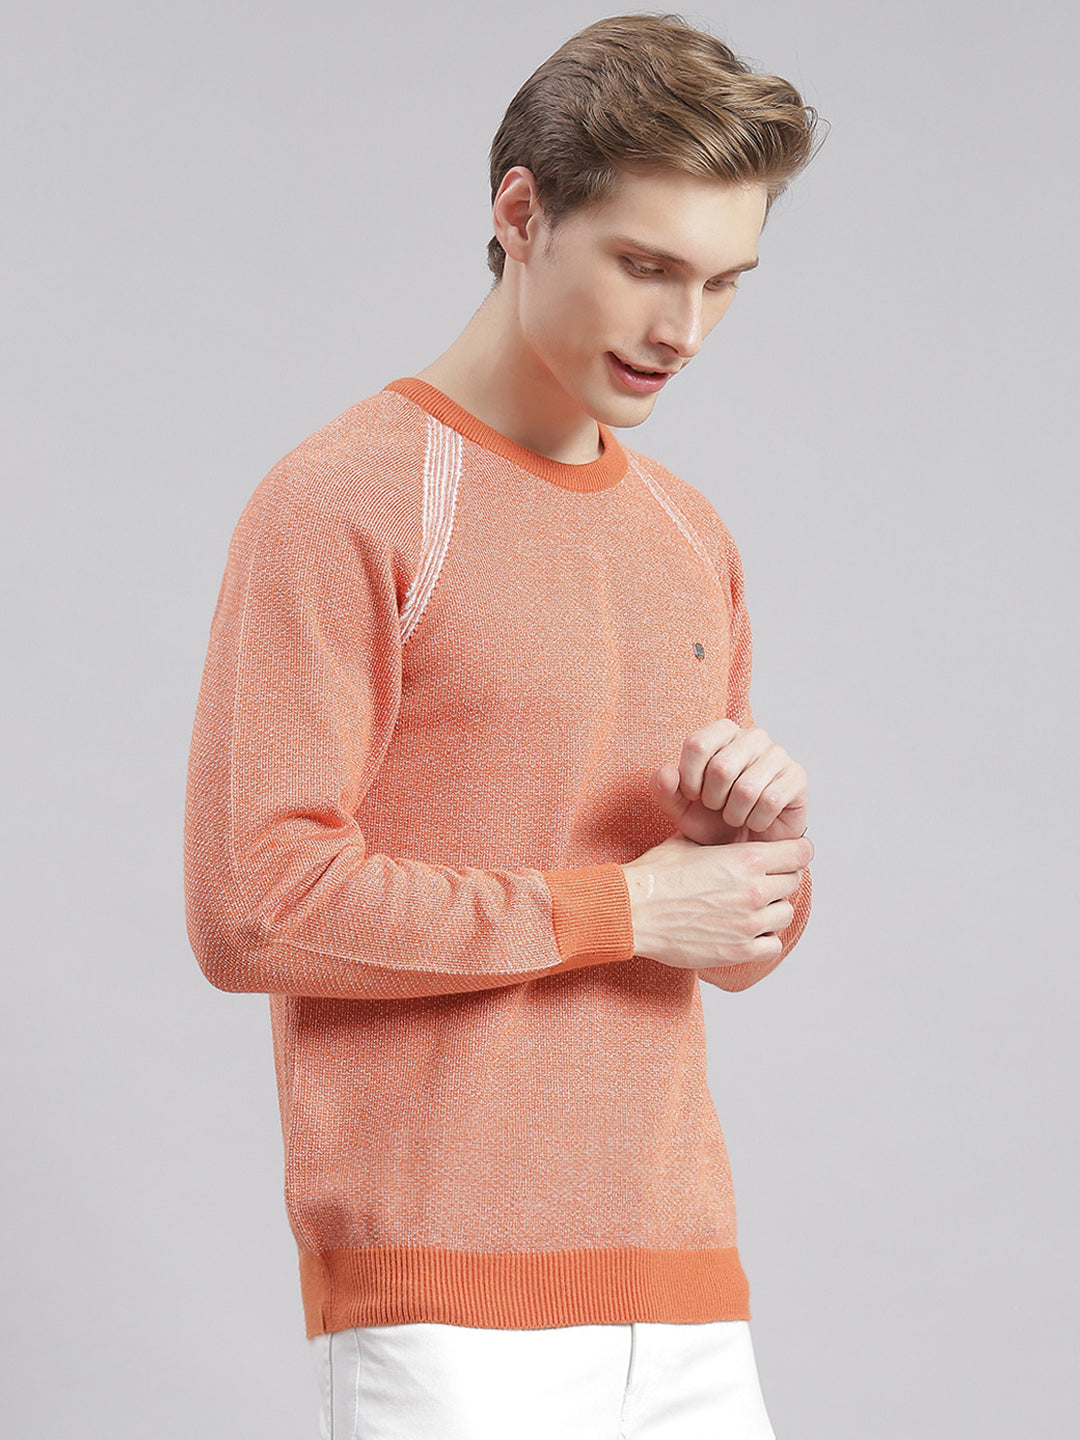 Men Rust Solid Round Neck Full Sleeve Sweaters/Pullovers